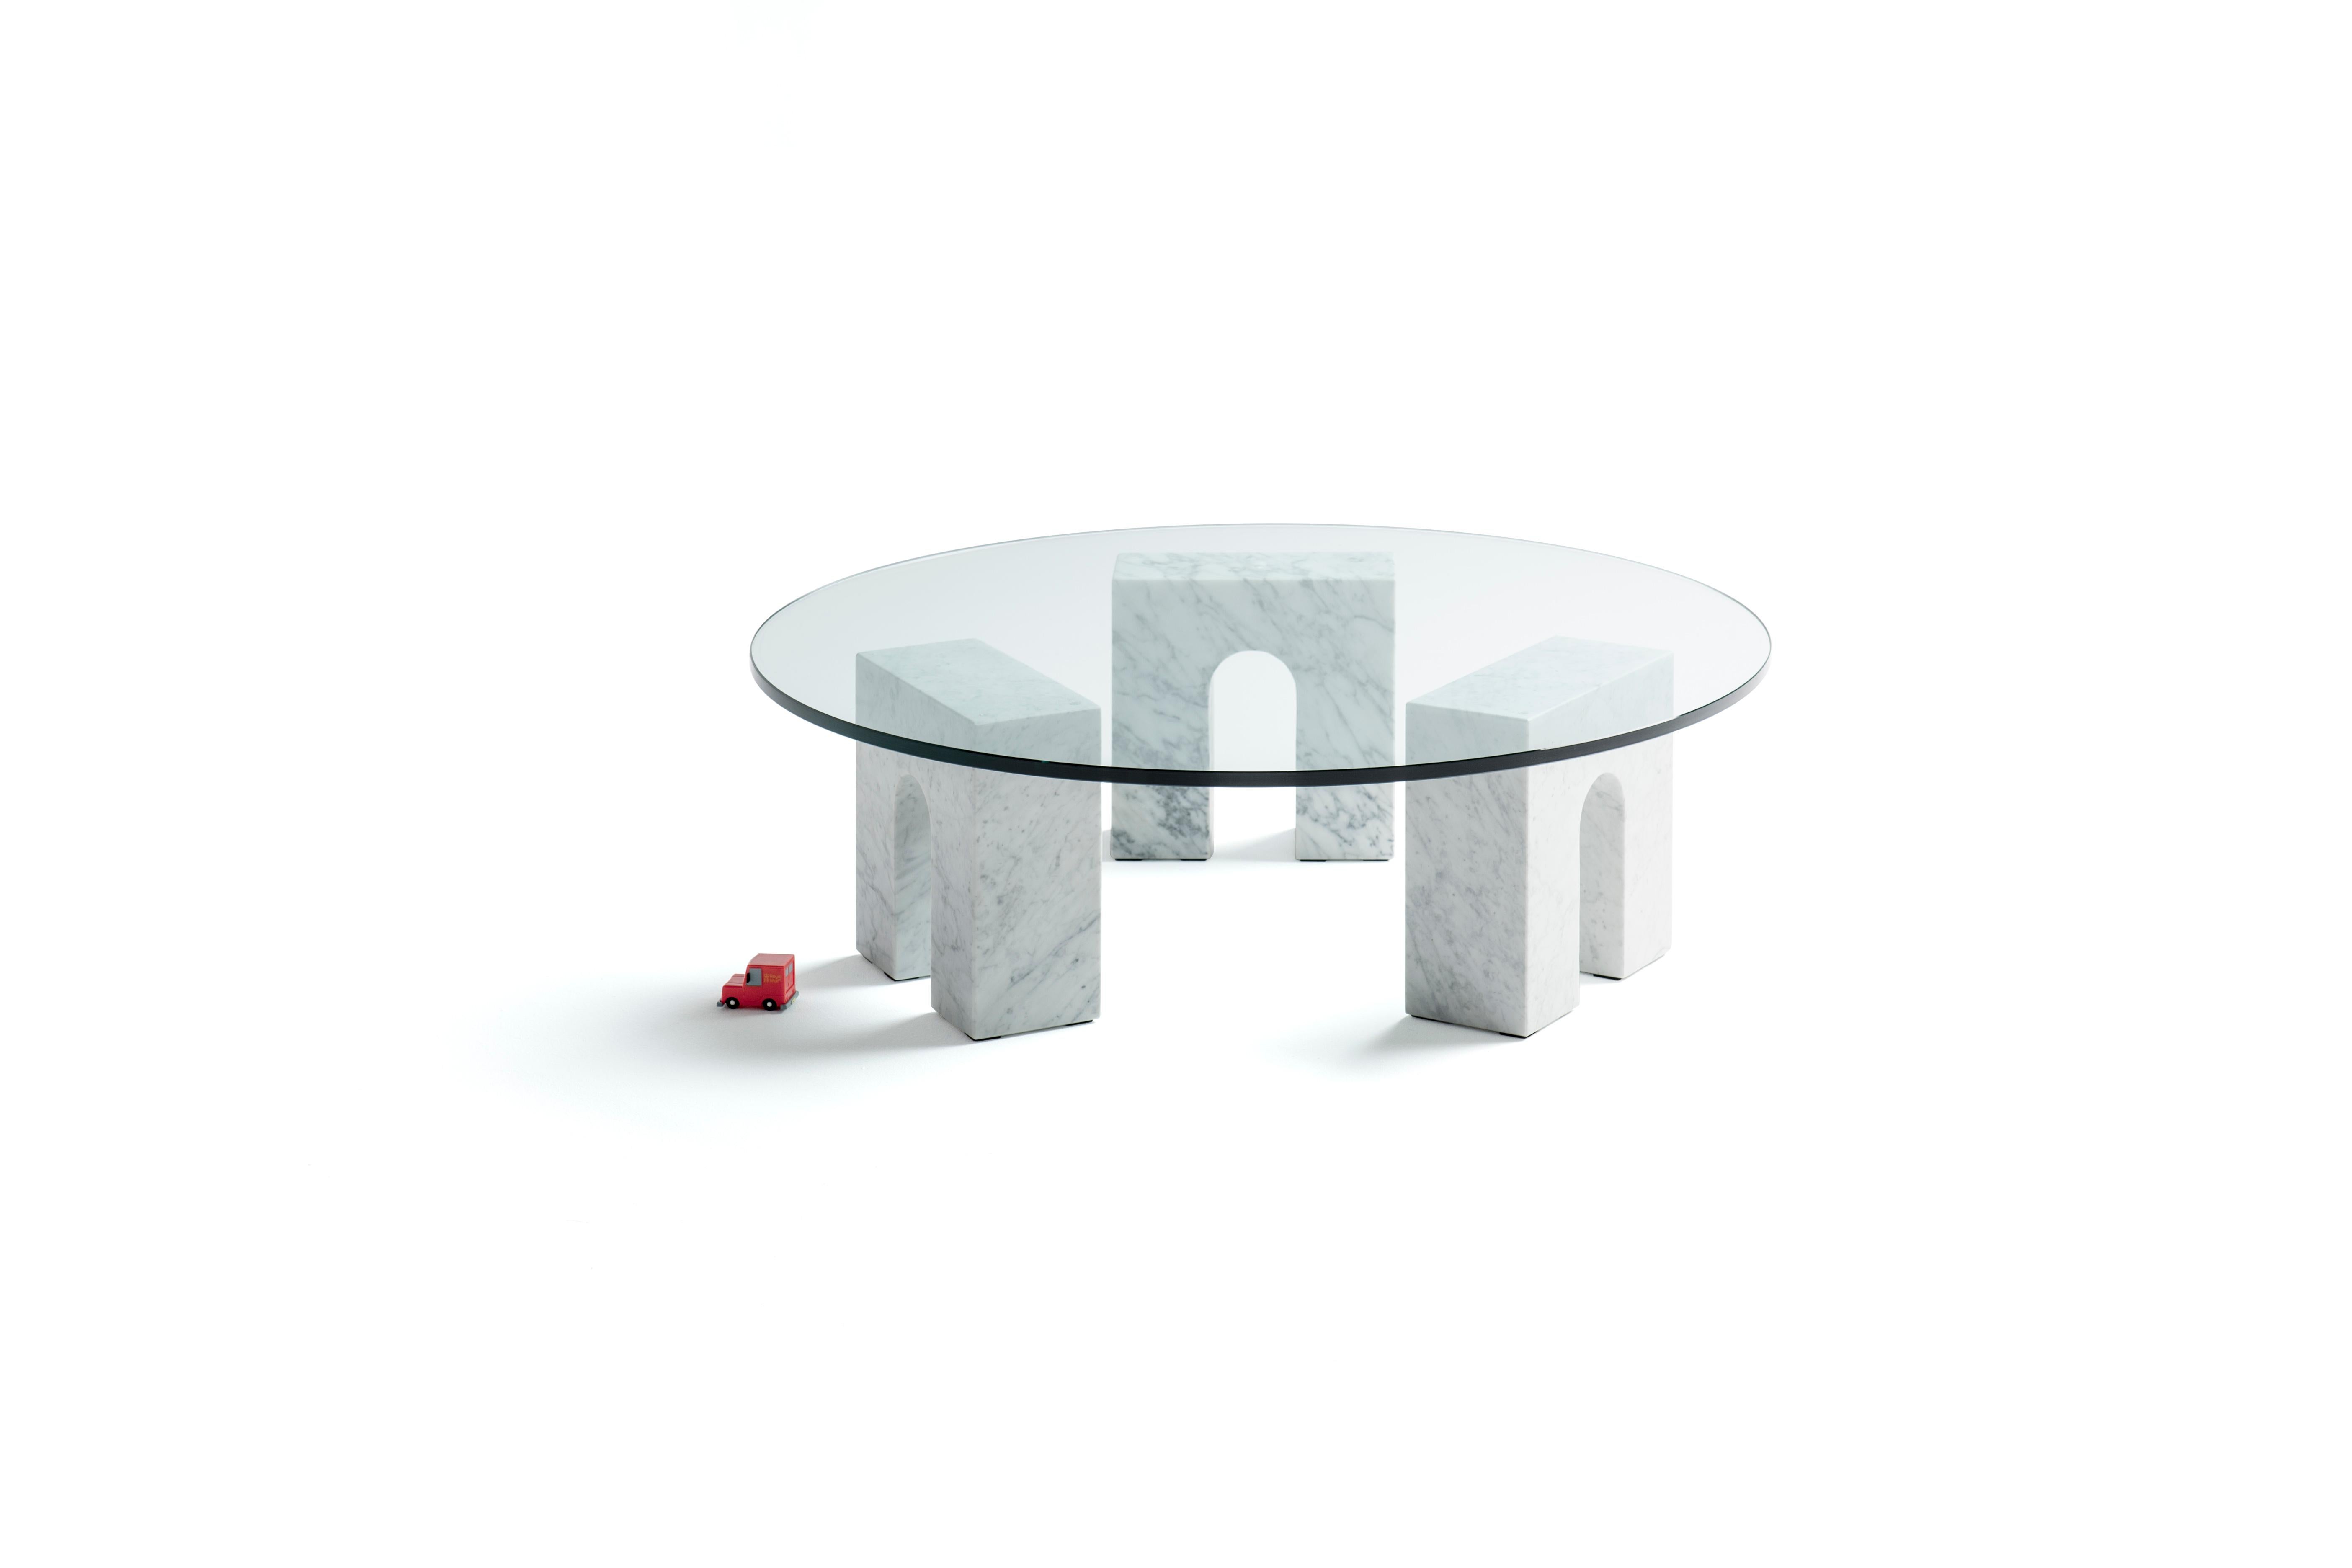 Triumph marble table by Joseph Vila Capdevila
Materials: Carrara marble, Tempered glass
Dimensions: ø 94 x 29.5 cm
Weight: 21 kg

Luxurious mirror in two separated parts: the base, made with premium Carrara marble, and mirror, that can be